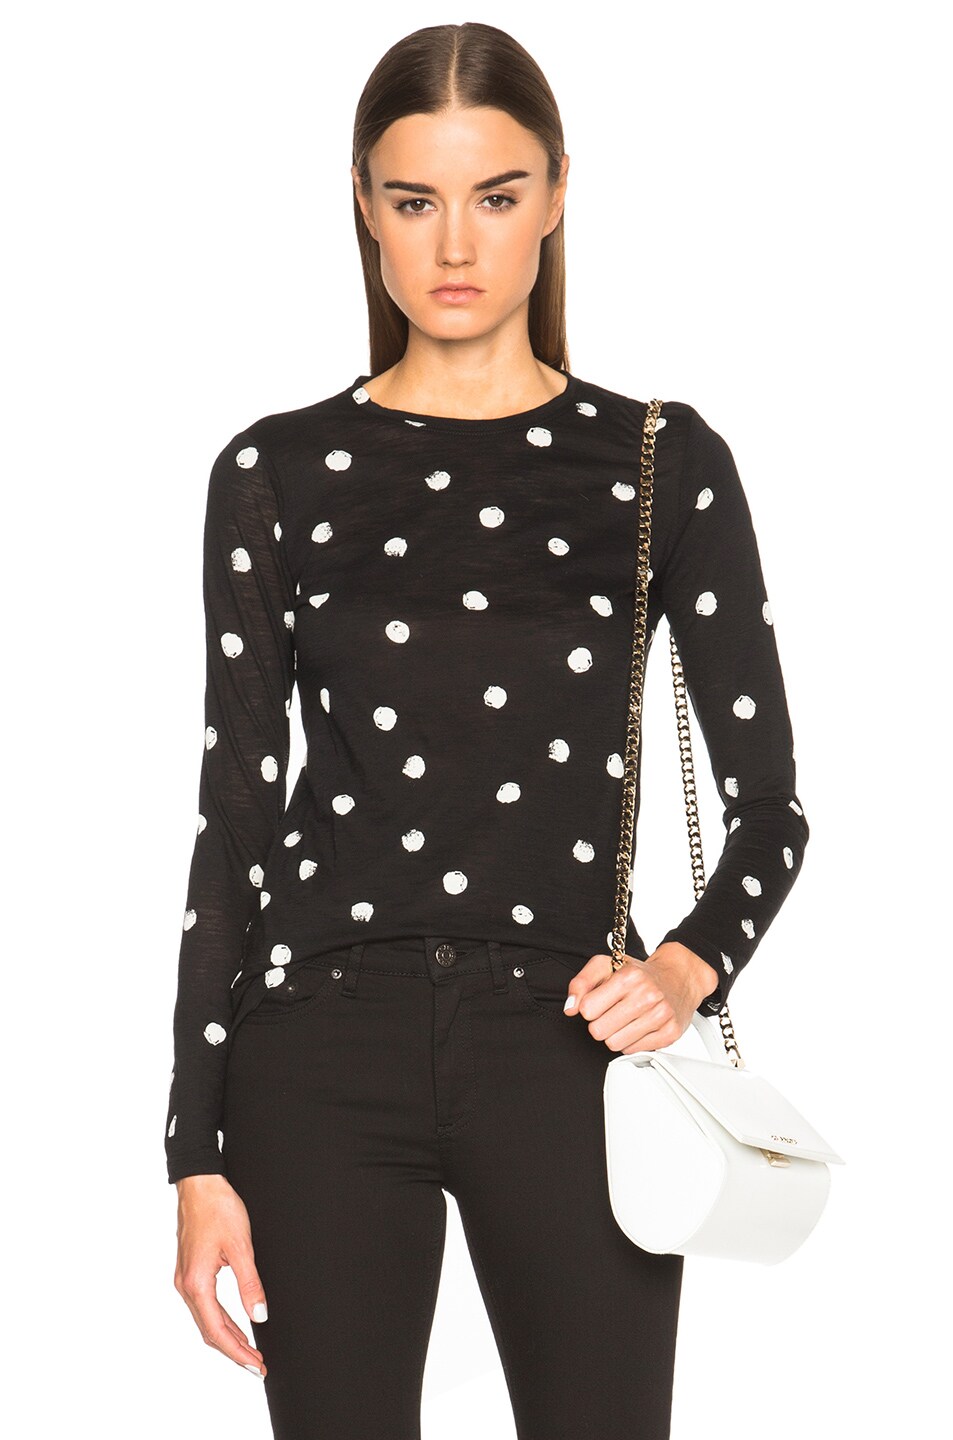 Image 1 of Proenza Schouler Printed Tissue Jersey Long Sleeve Tee in Black & White Dot Print